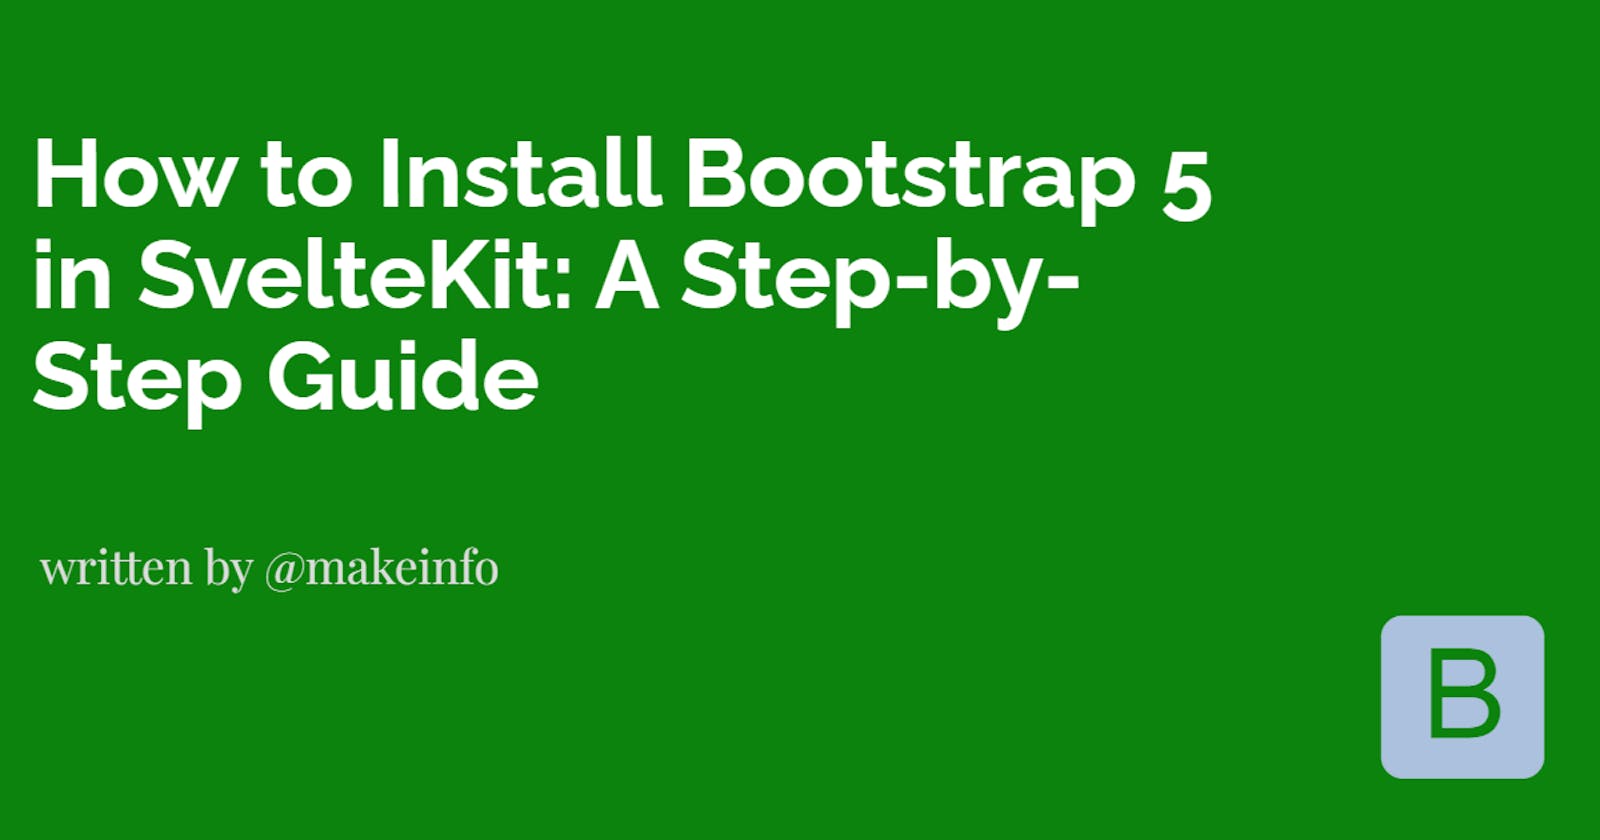 How to Install Bootstrap 5 in SvelteKit: A Step-by-Step Guide